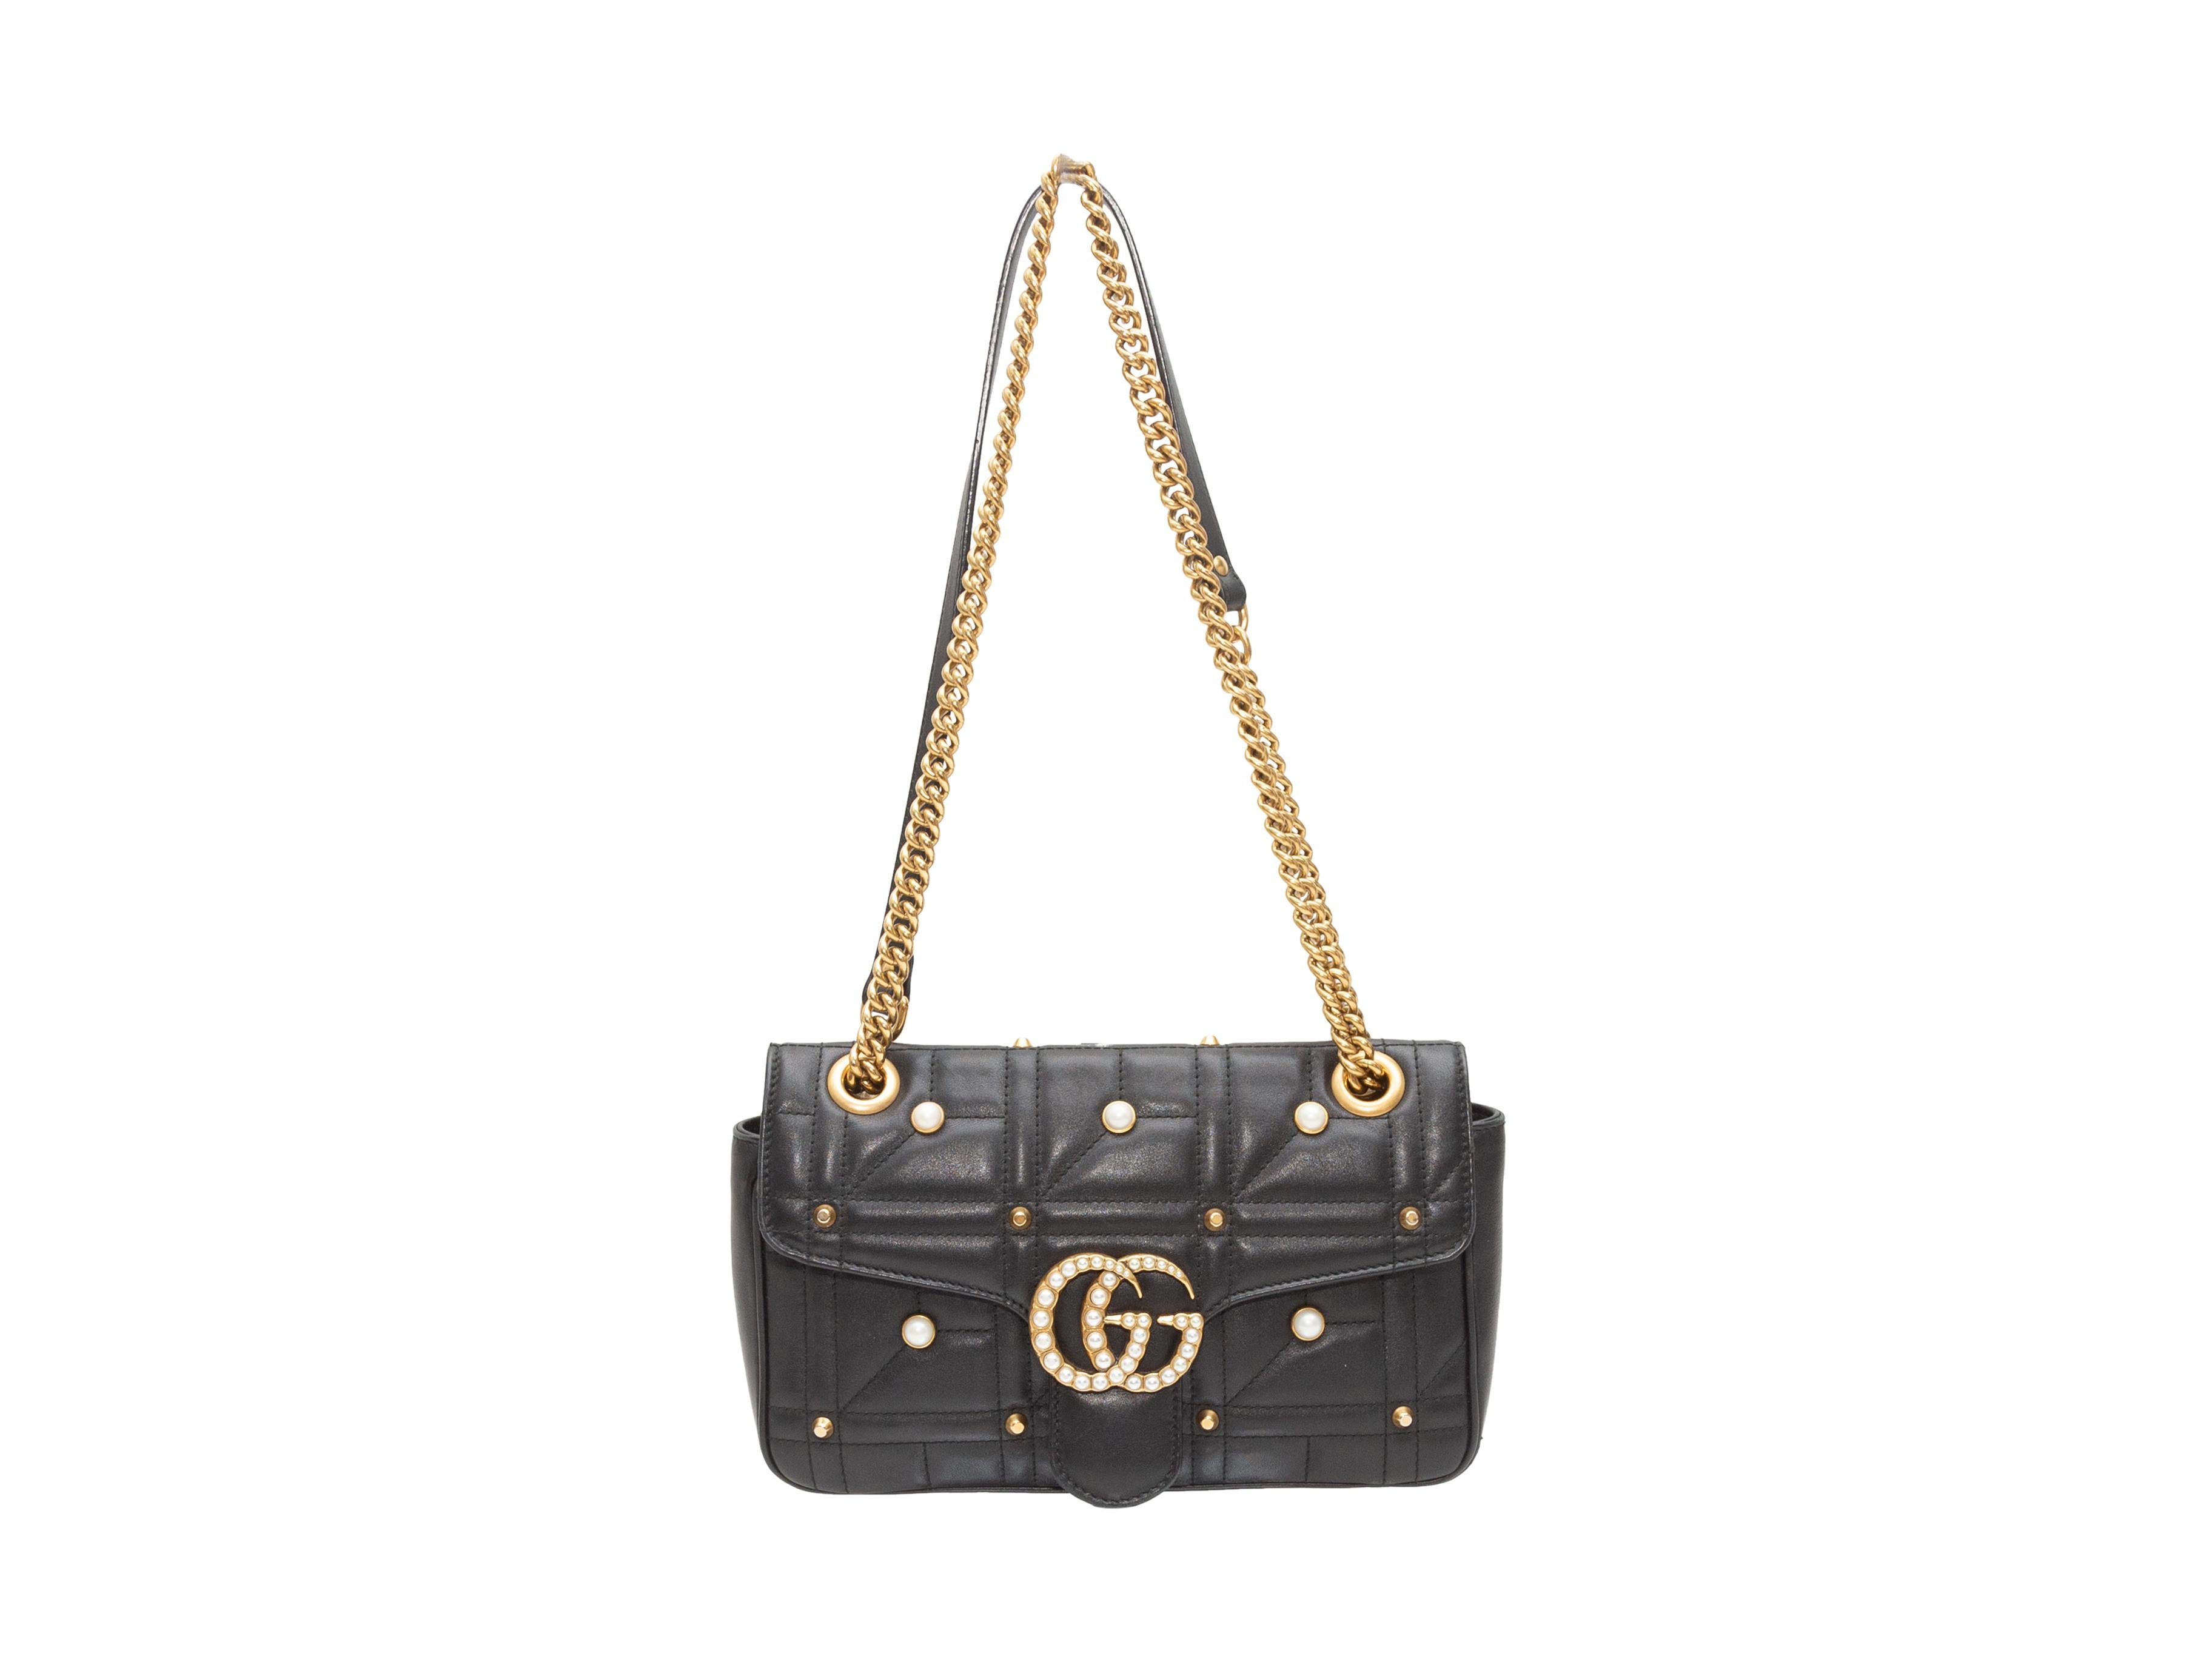 Product details: Black Gucci Small GG Marmont Matelasse Bag. This bag features a leather body, gold-tone hardware, a chain-link and leather strap, faux pearl embellishments throughout, and a GG closure at the front flap. 10